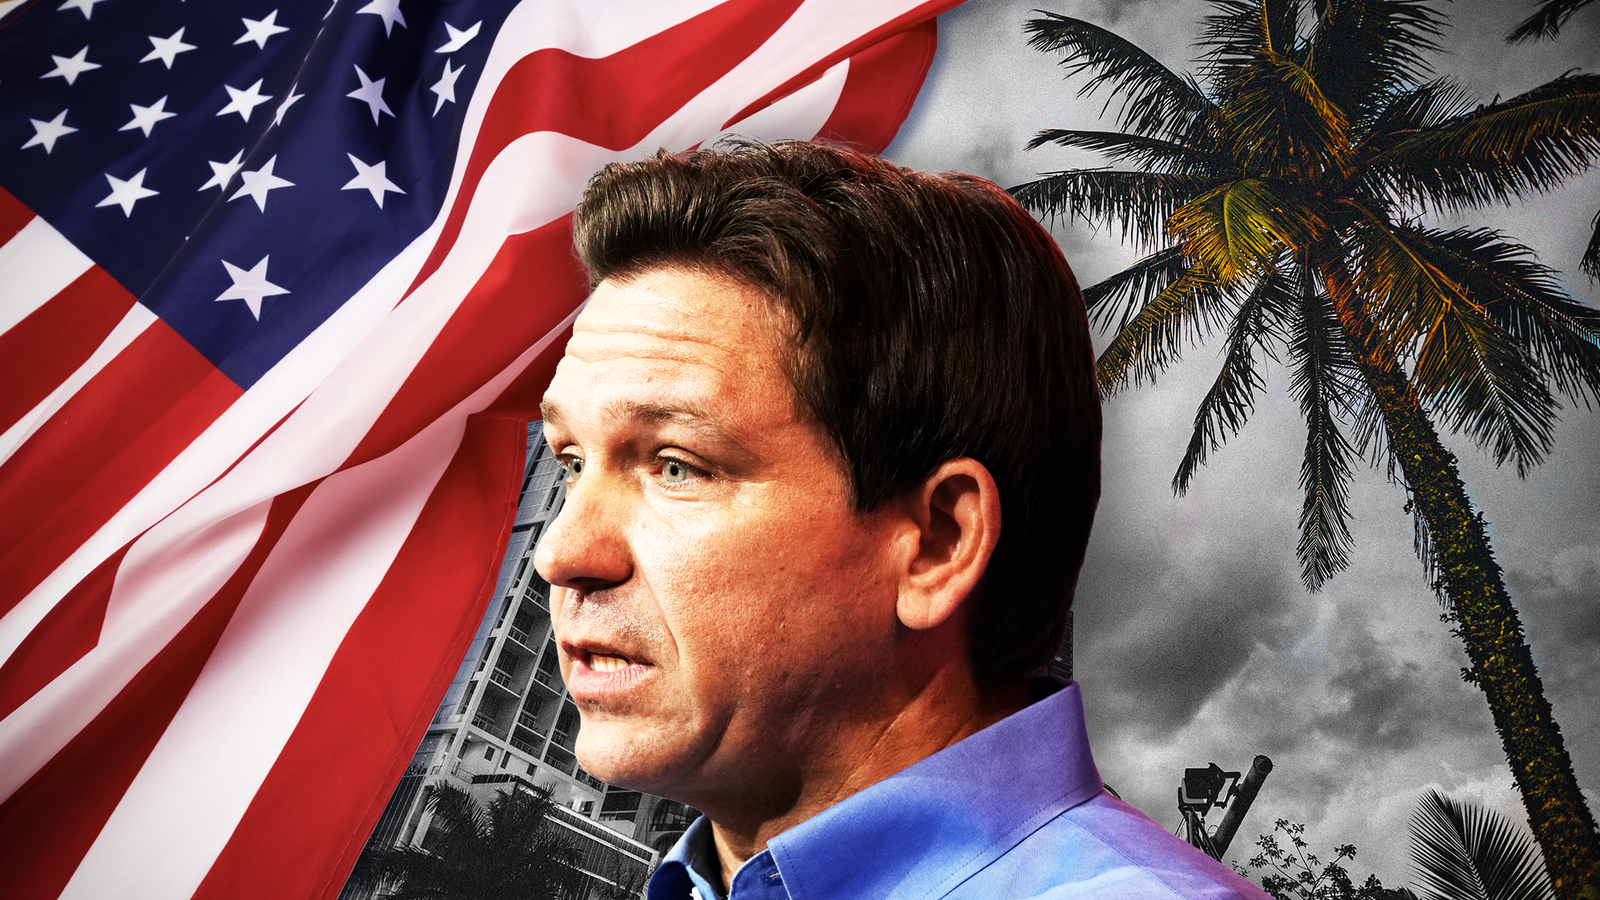 The controversial Florida governor taking on Mickey Mouse and Donald Trump  - five things to know about Ron DeSantis